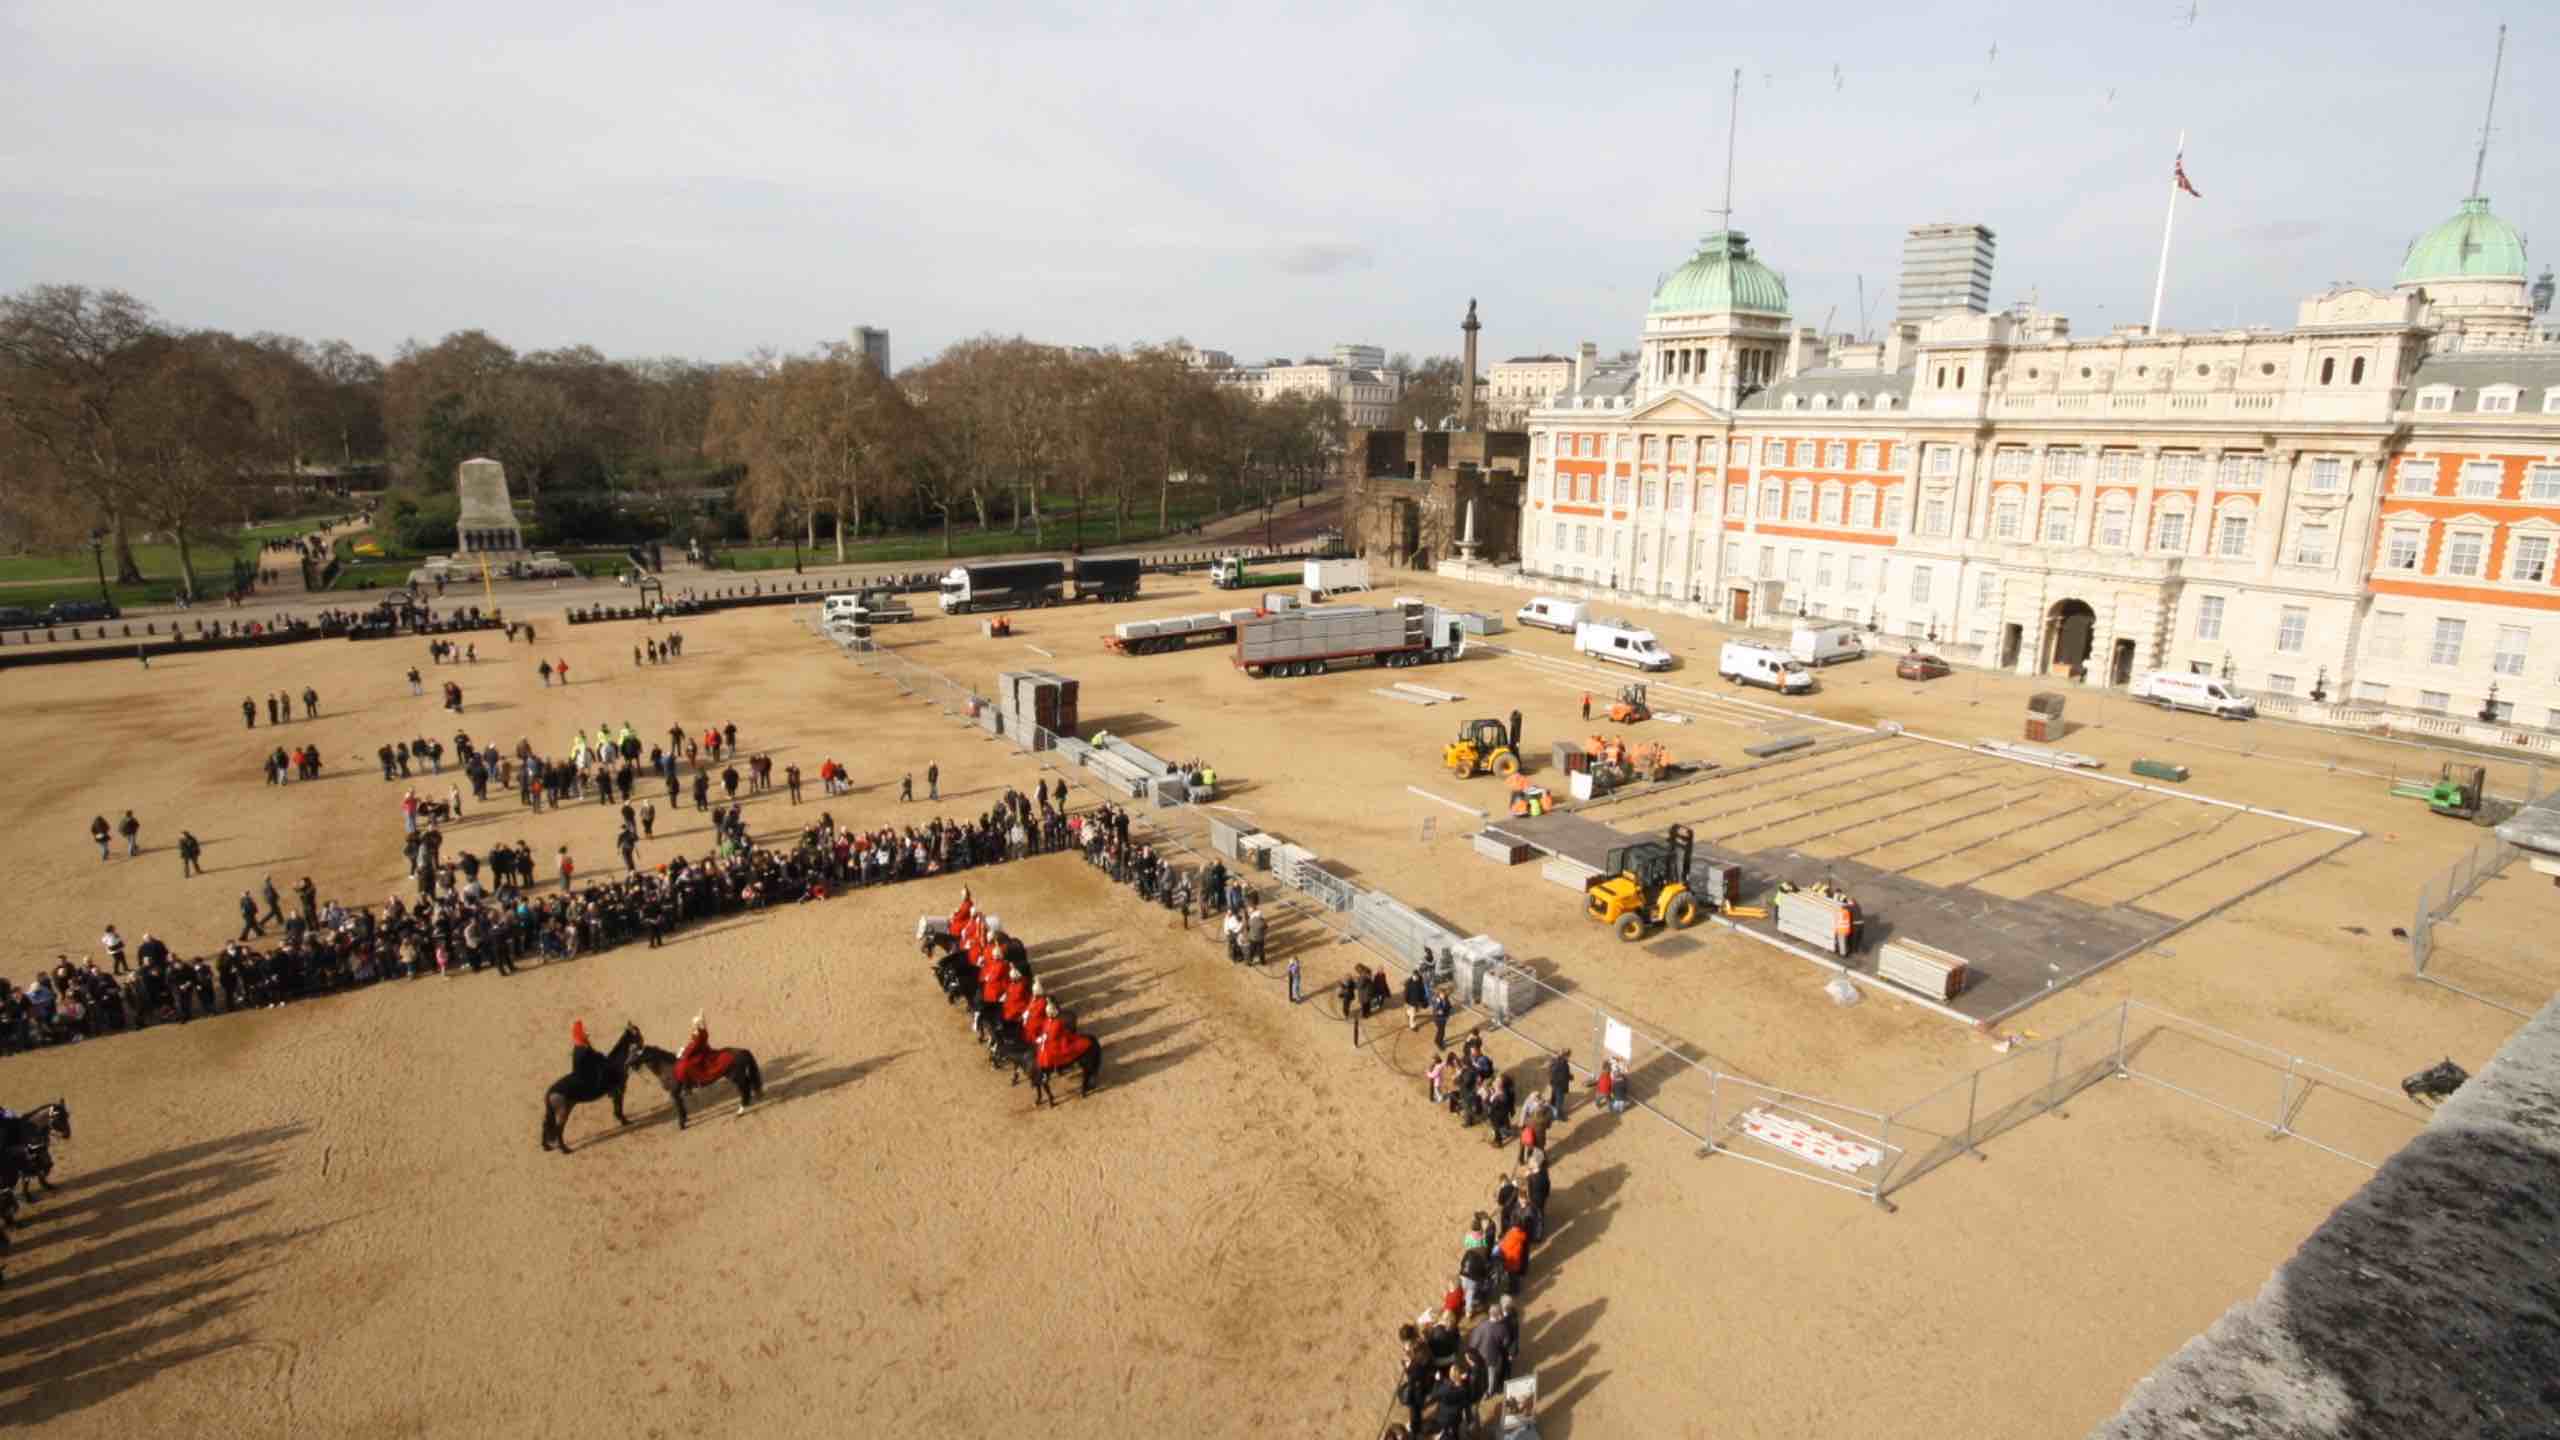 An image of the Horse Guard's Parade taken from open of Time-Lapse Systems above Ultra HD cameras.